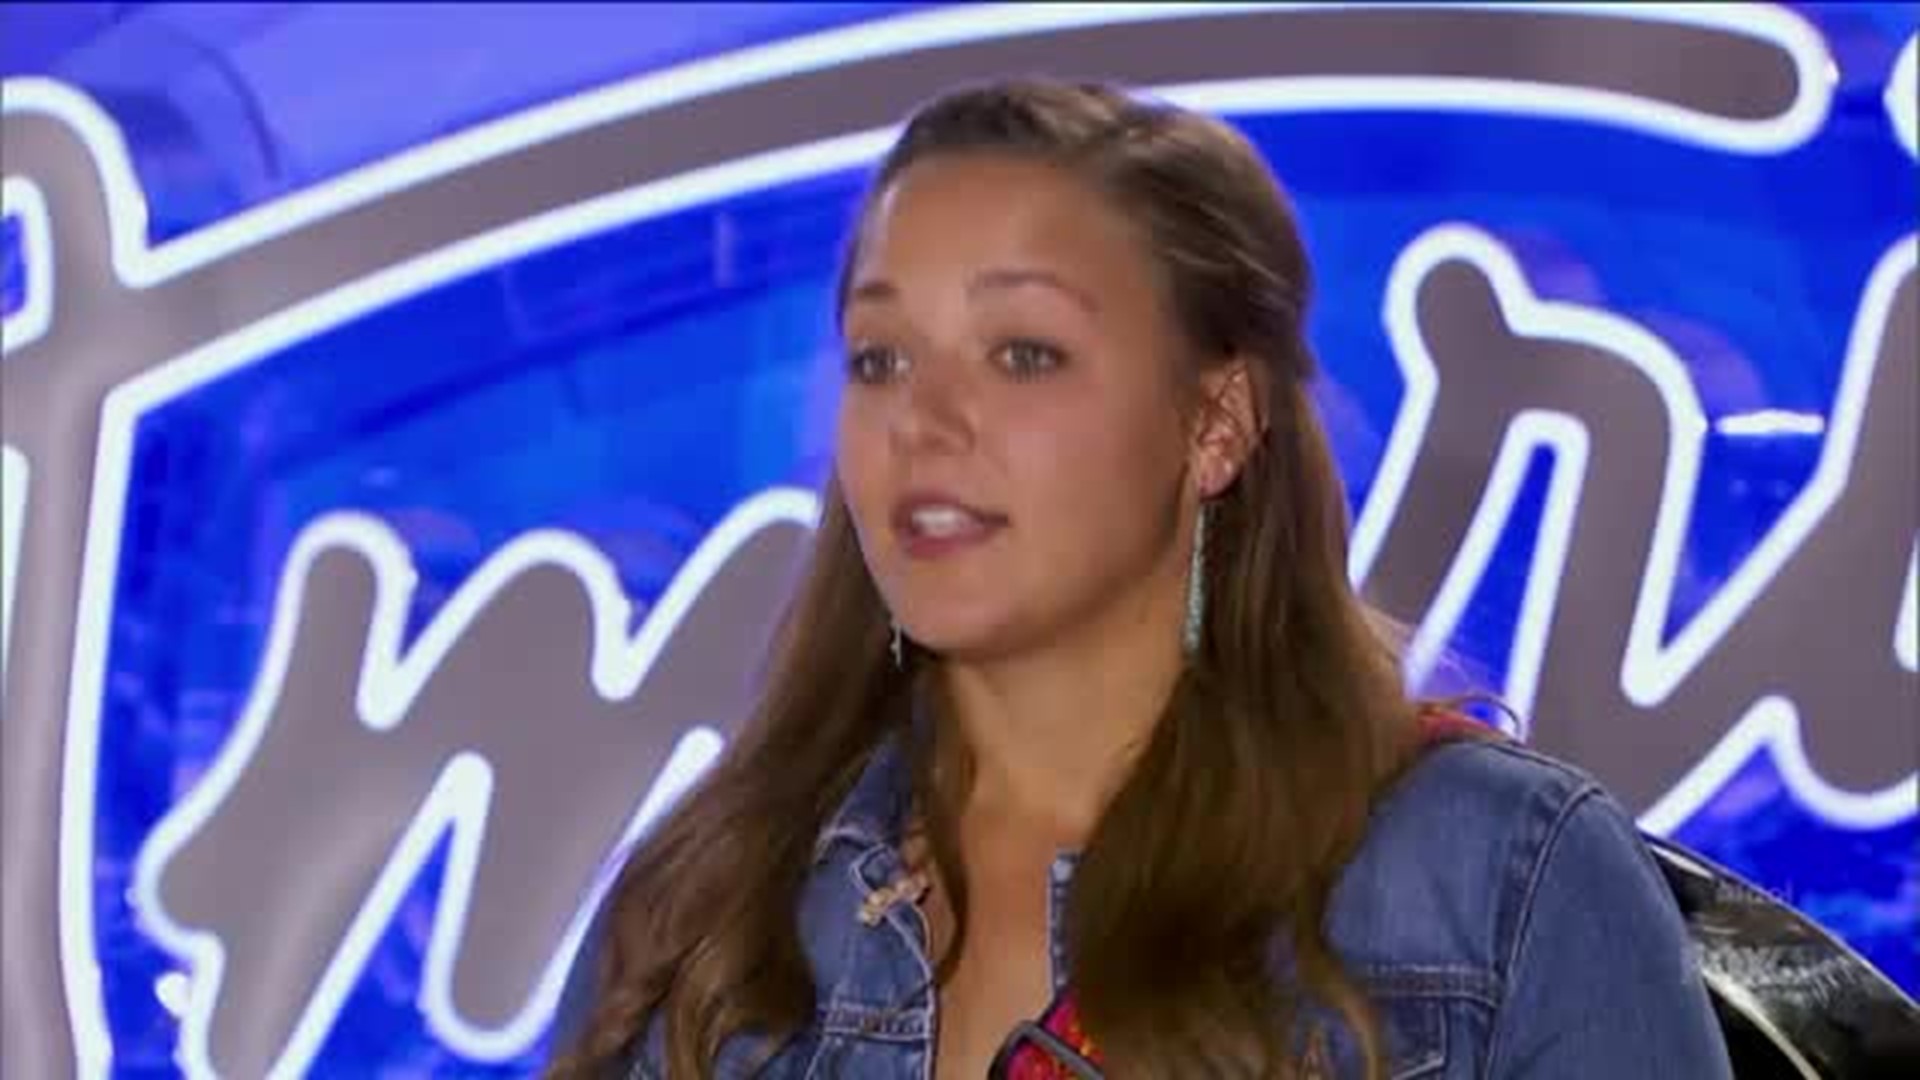 Emily Wears shows off her auctioneering skills on 'American Idol'